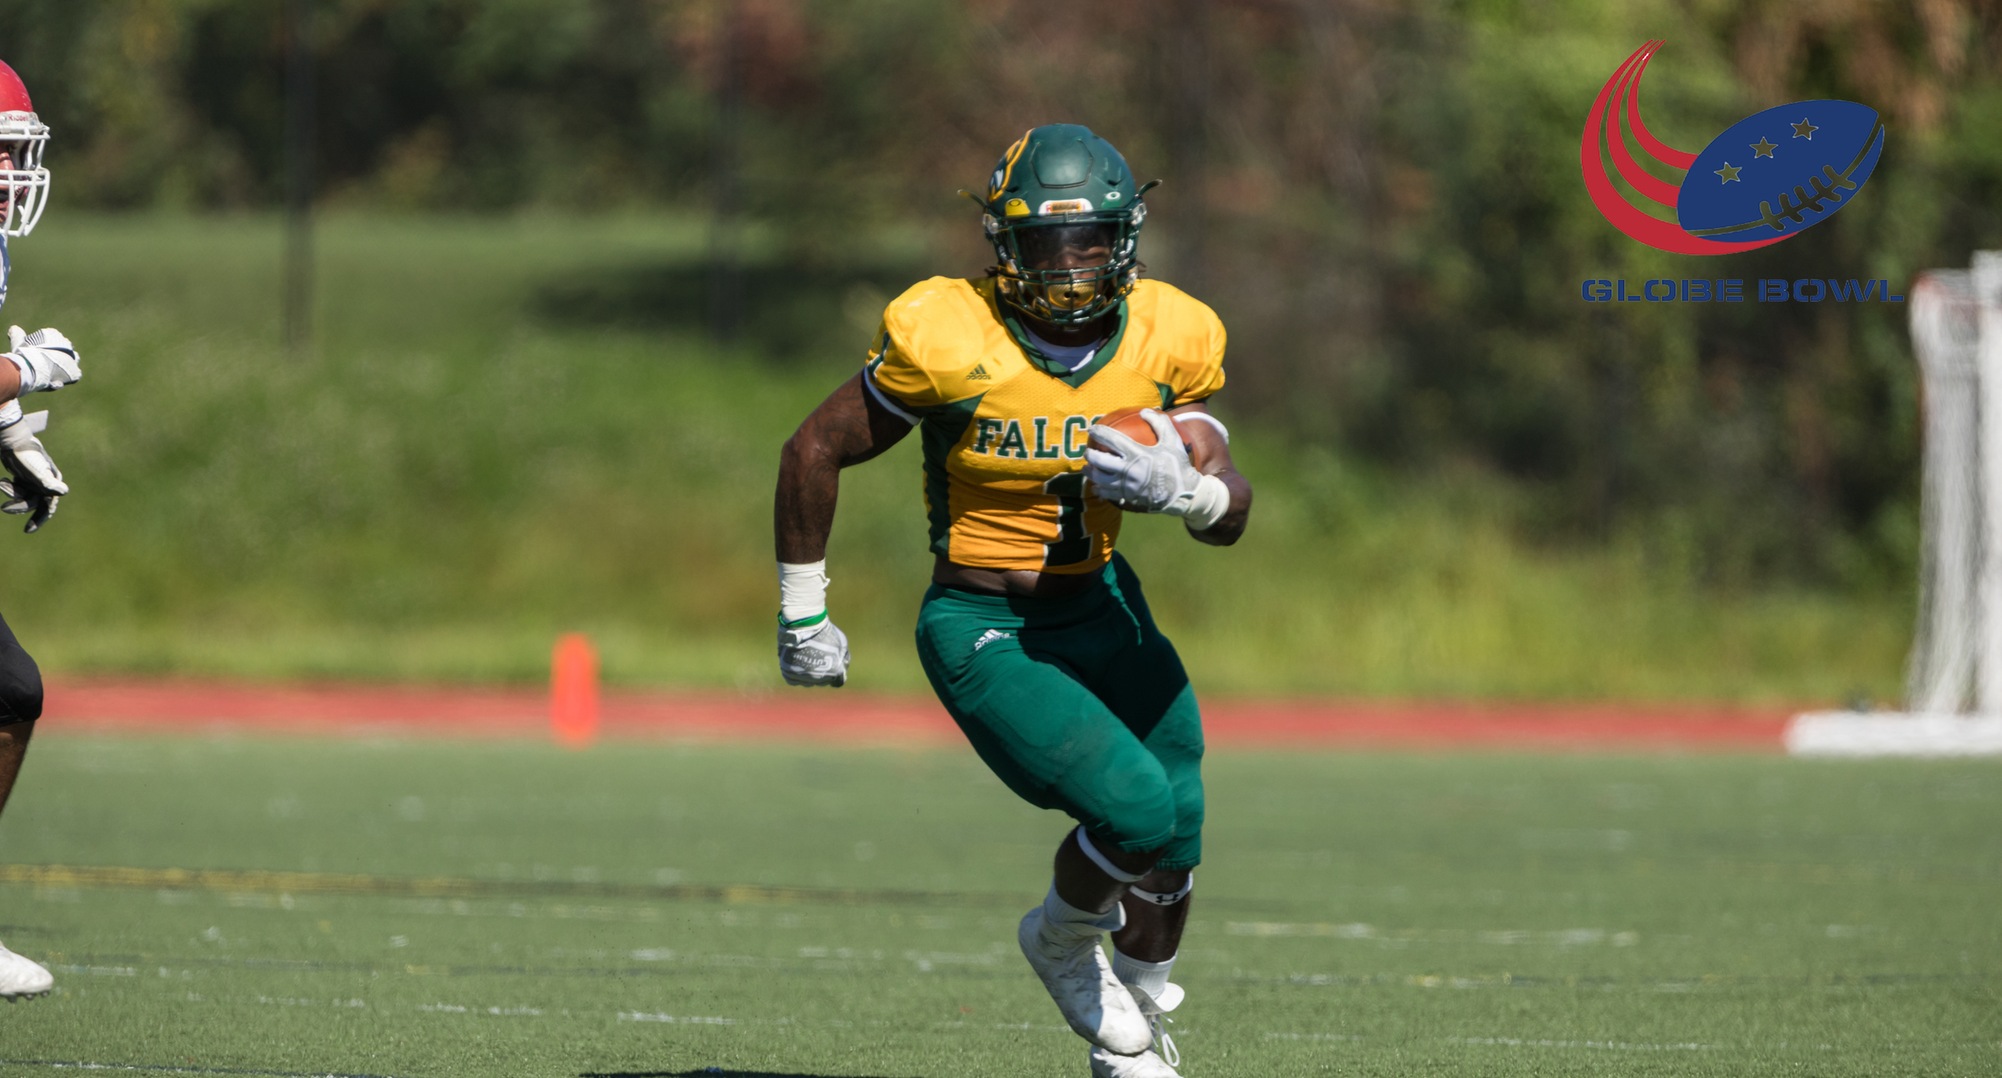 Brown-Simpson To Represent Fitchburg State At 2018 Globe Bowl